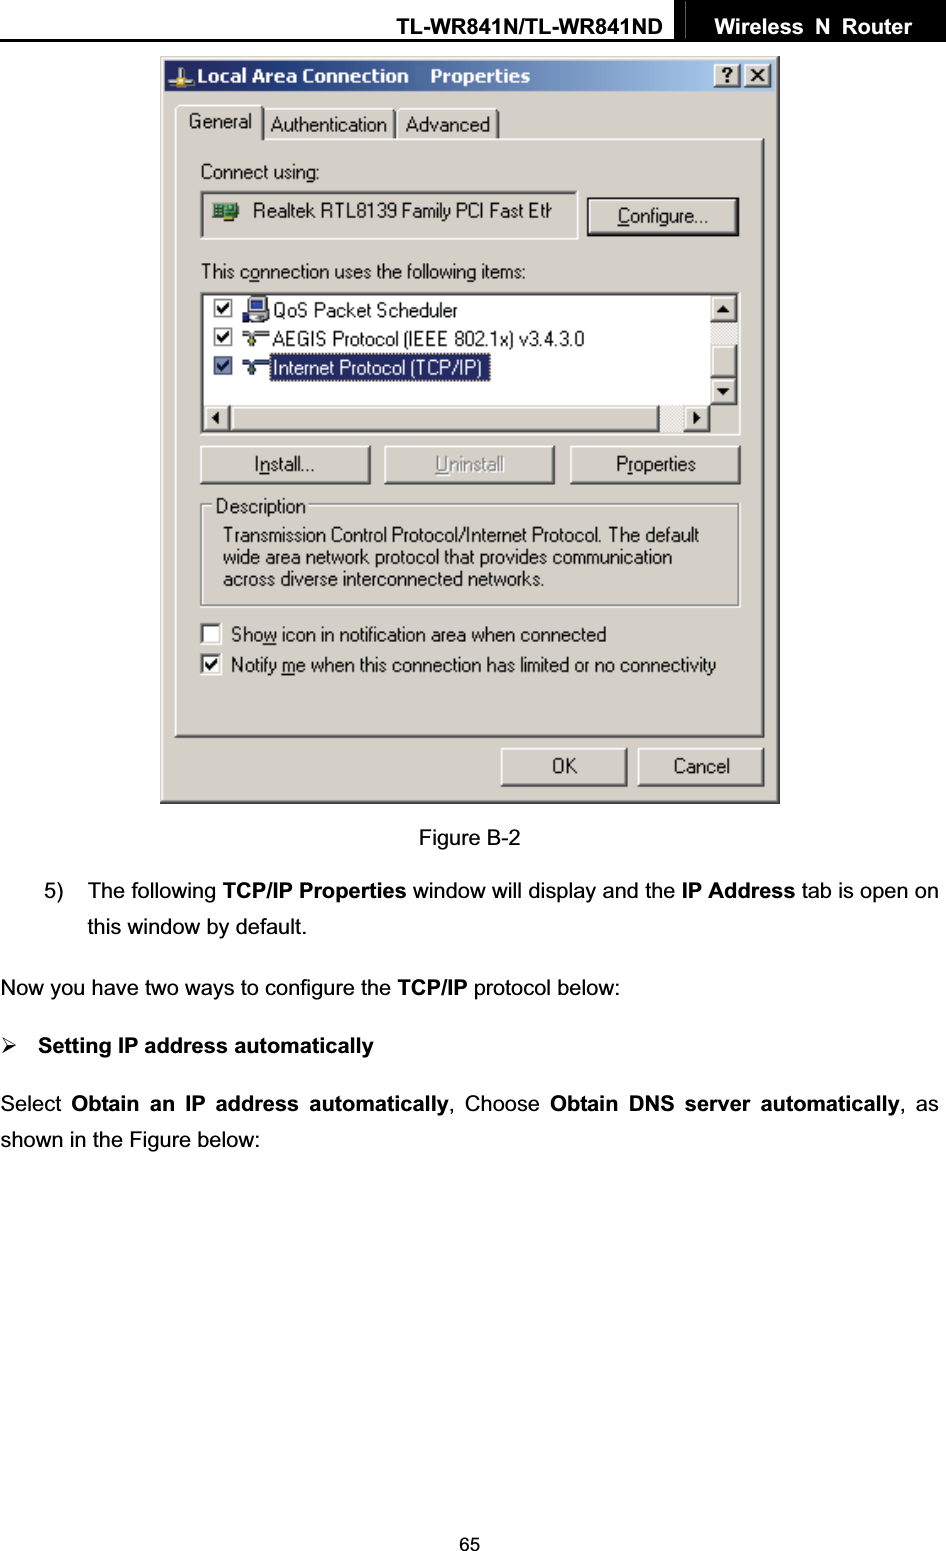 TL-WR841N/TL-WR841ND  Wireless N Router  65Figure B-2 5) The following TCP/IP Properties window will display and the IP Address tab is open on this window by default. Now you have two ways to configure the TCP/IP protocol below: ¾Setting IP address automaticallySelect Obtain an IP address automatically, Choose Obtain DNS server automatically, as shown in the Figure below: 